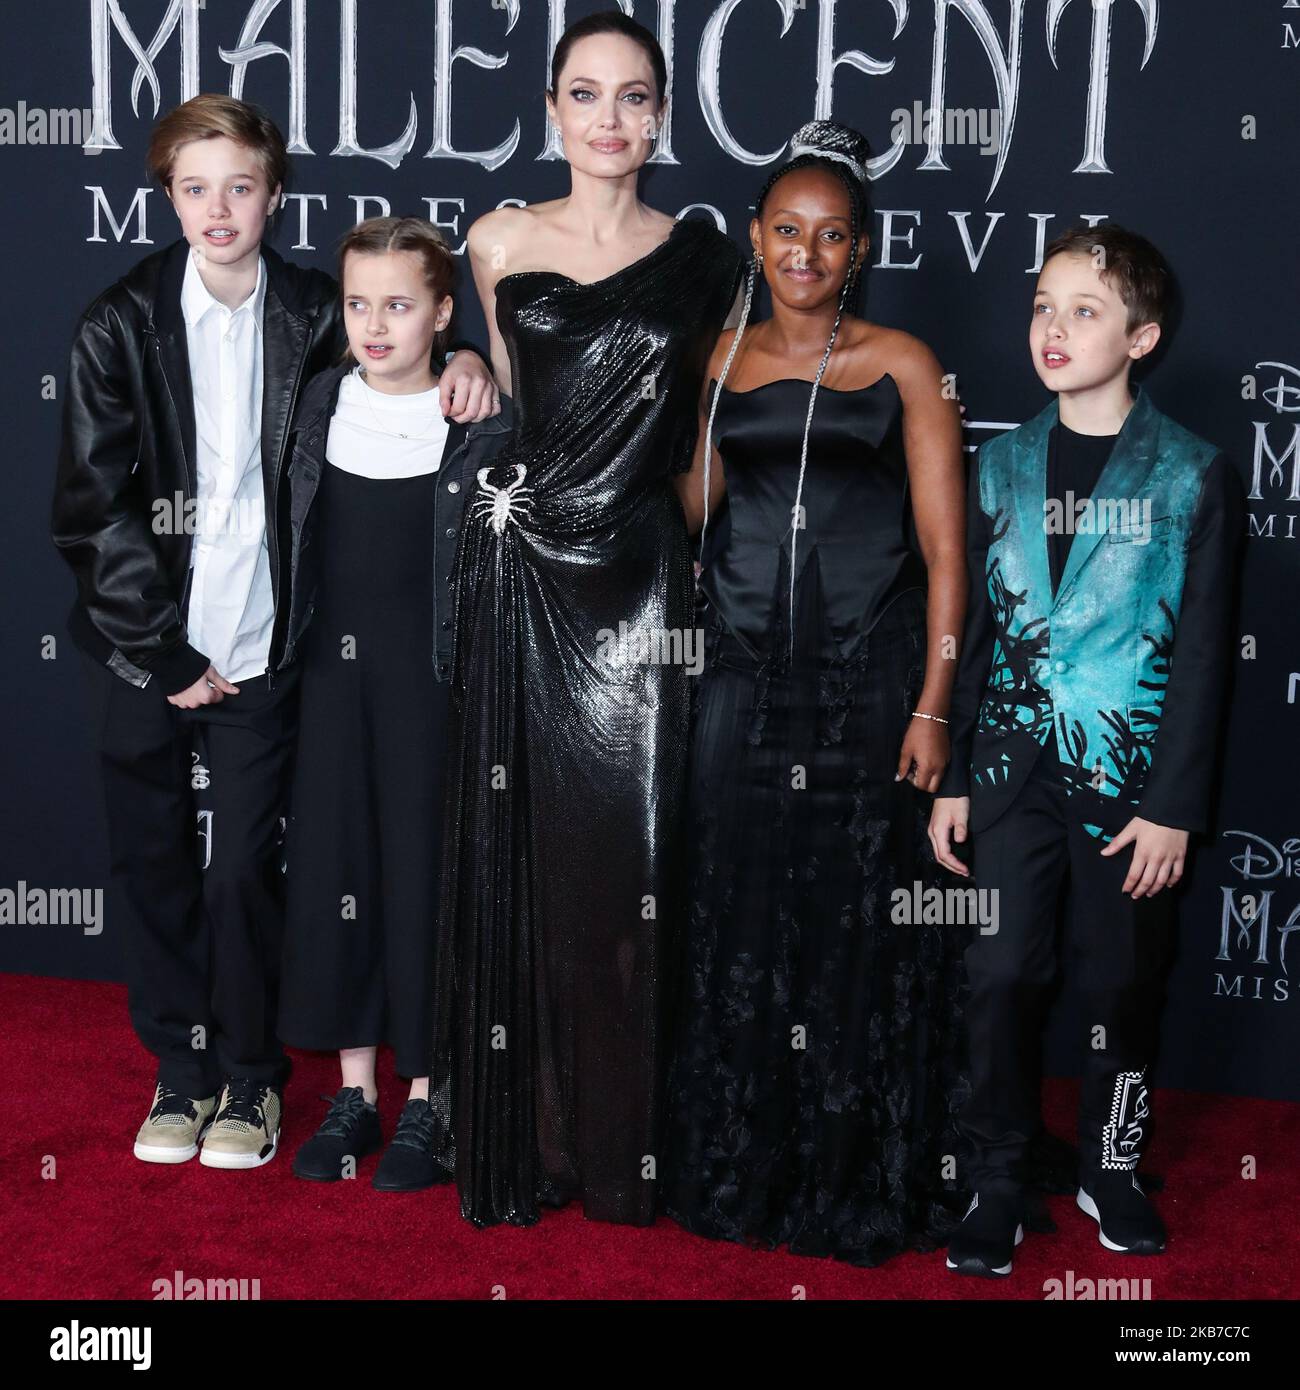 HOLLYWOOD, LOS ANGELES, CALIFORNIA, USA - SEPTEMBER 30: Shiloh Nouvel Jolie-Pitt, Vivienne Marcheline Jolie-Pitt, Angelina Jolie, Zahara Marley Jolie-Pitt and Knox Leon Jolie-Pitt arrive at the World Premiere Of Disney's 'Maleficent: Mistress Of Evil' held at the El Capitan Theatre on September 30, 2019 in Hollywood, Los Angeles, California, United States. (Photo by Xavier Collin/Image Press Agency/NurPhoto) Stock Photo